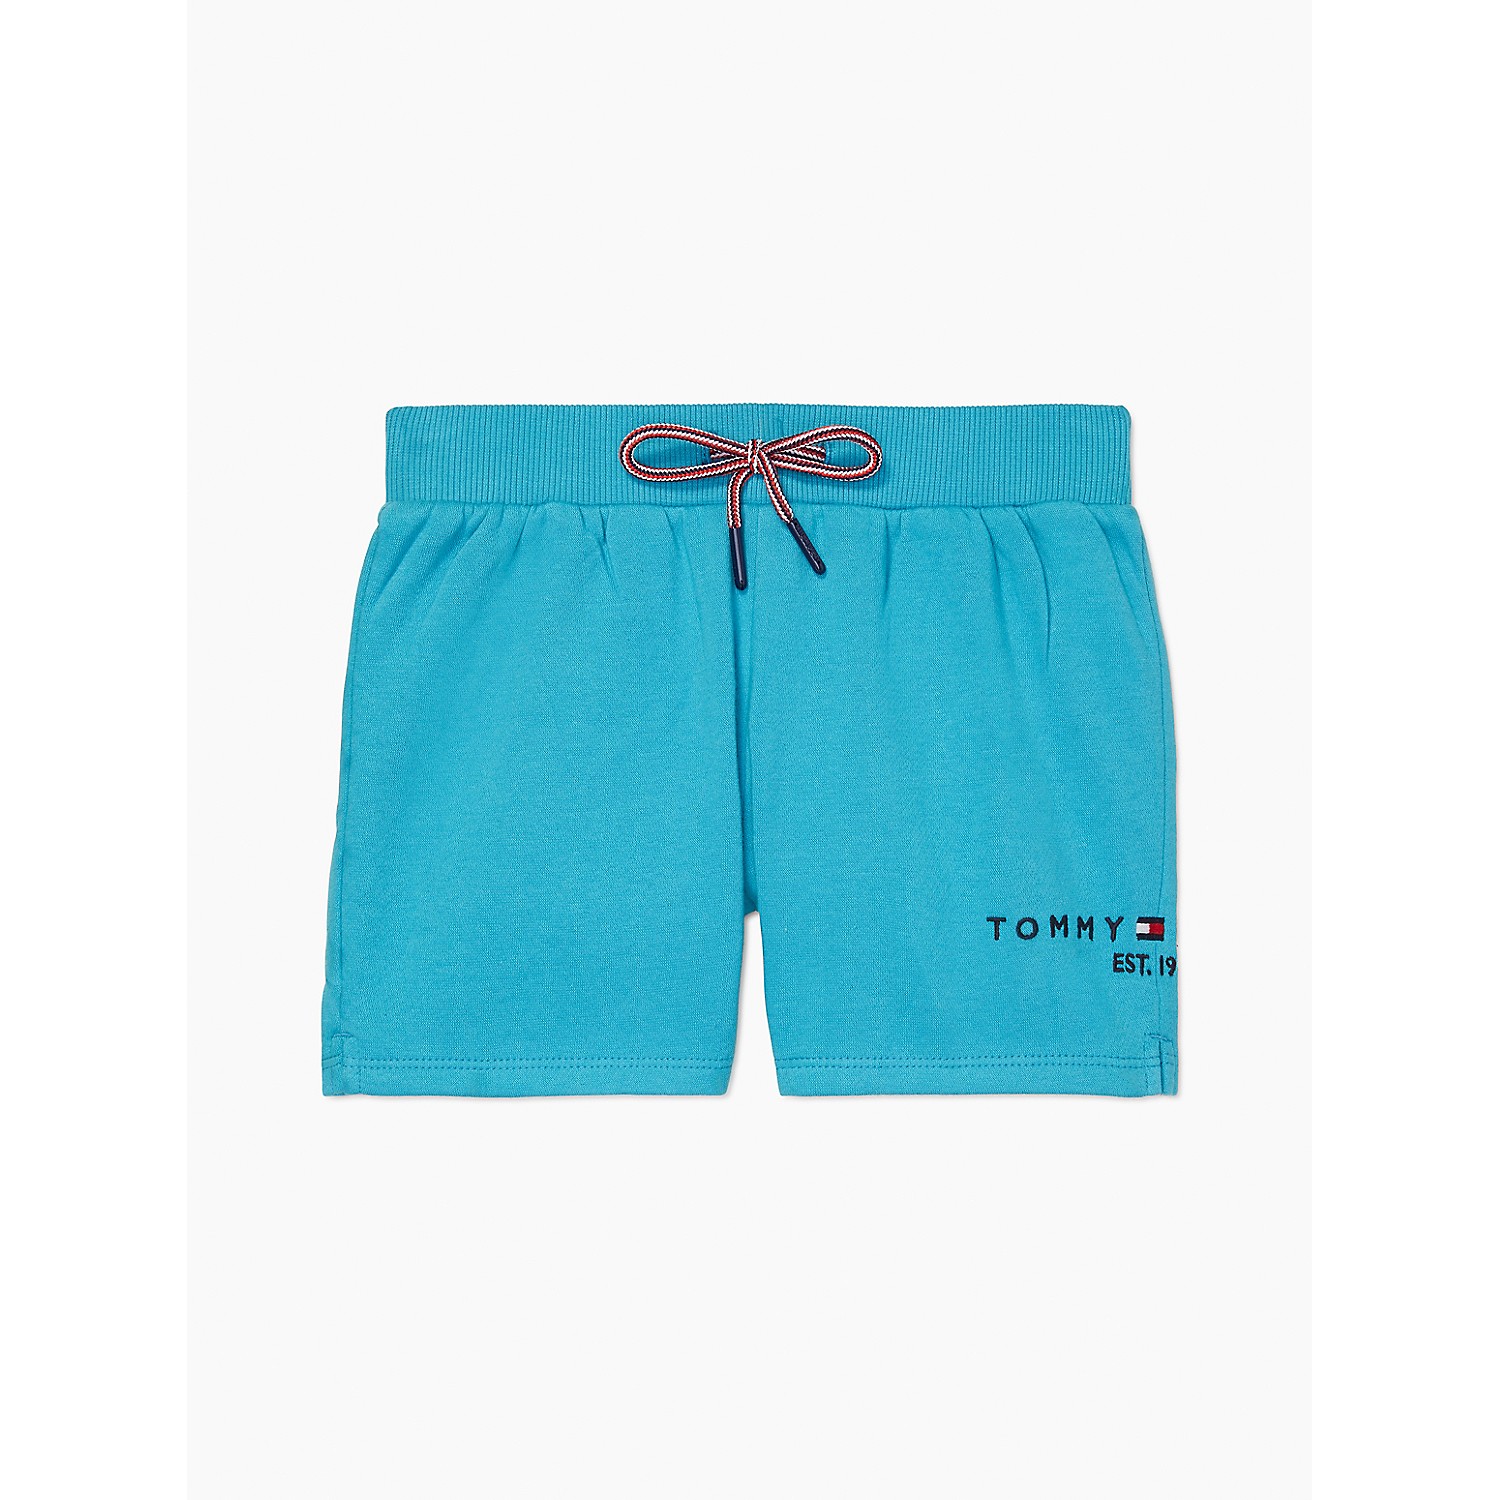 TOMMY HILFIGER Kids Seated Fit Knit Short